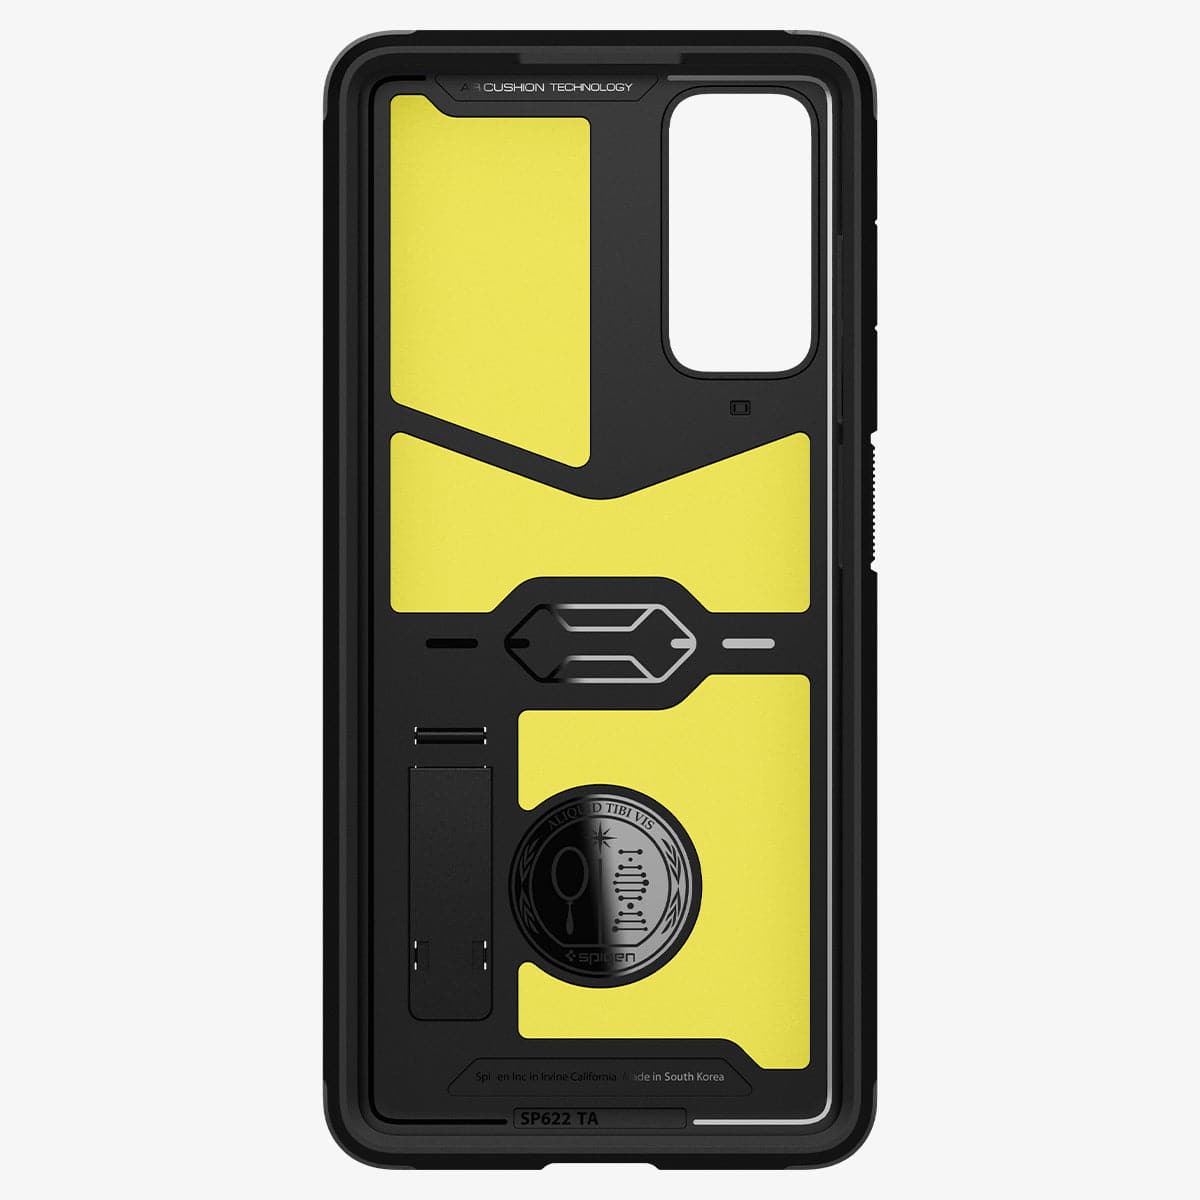 ACS02279 - Galaxy S20 FE Tough Armor Case in black showing the inside of case